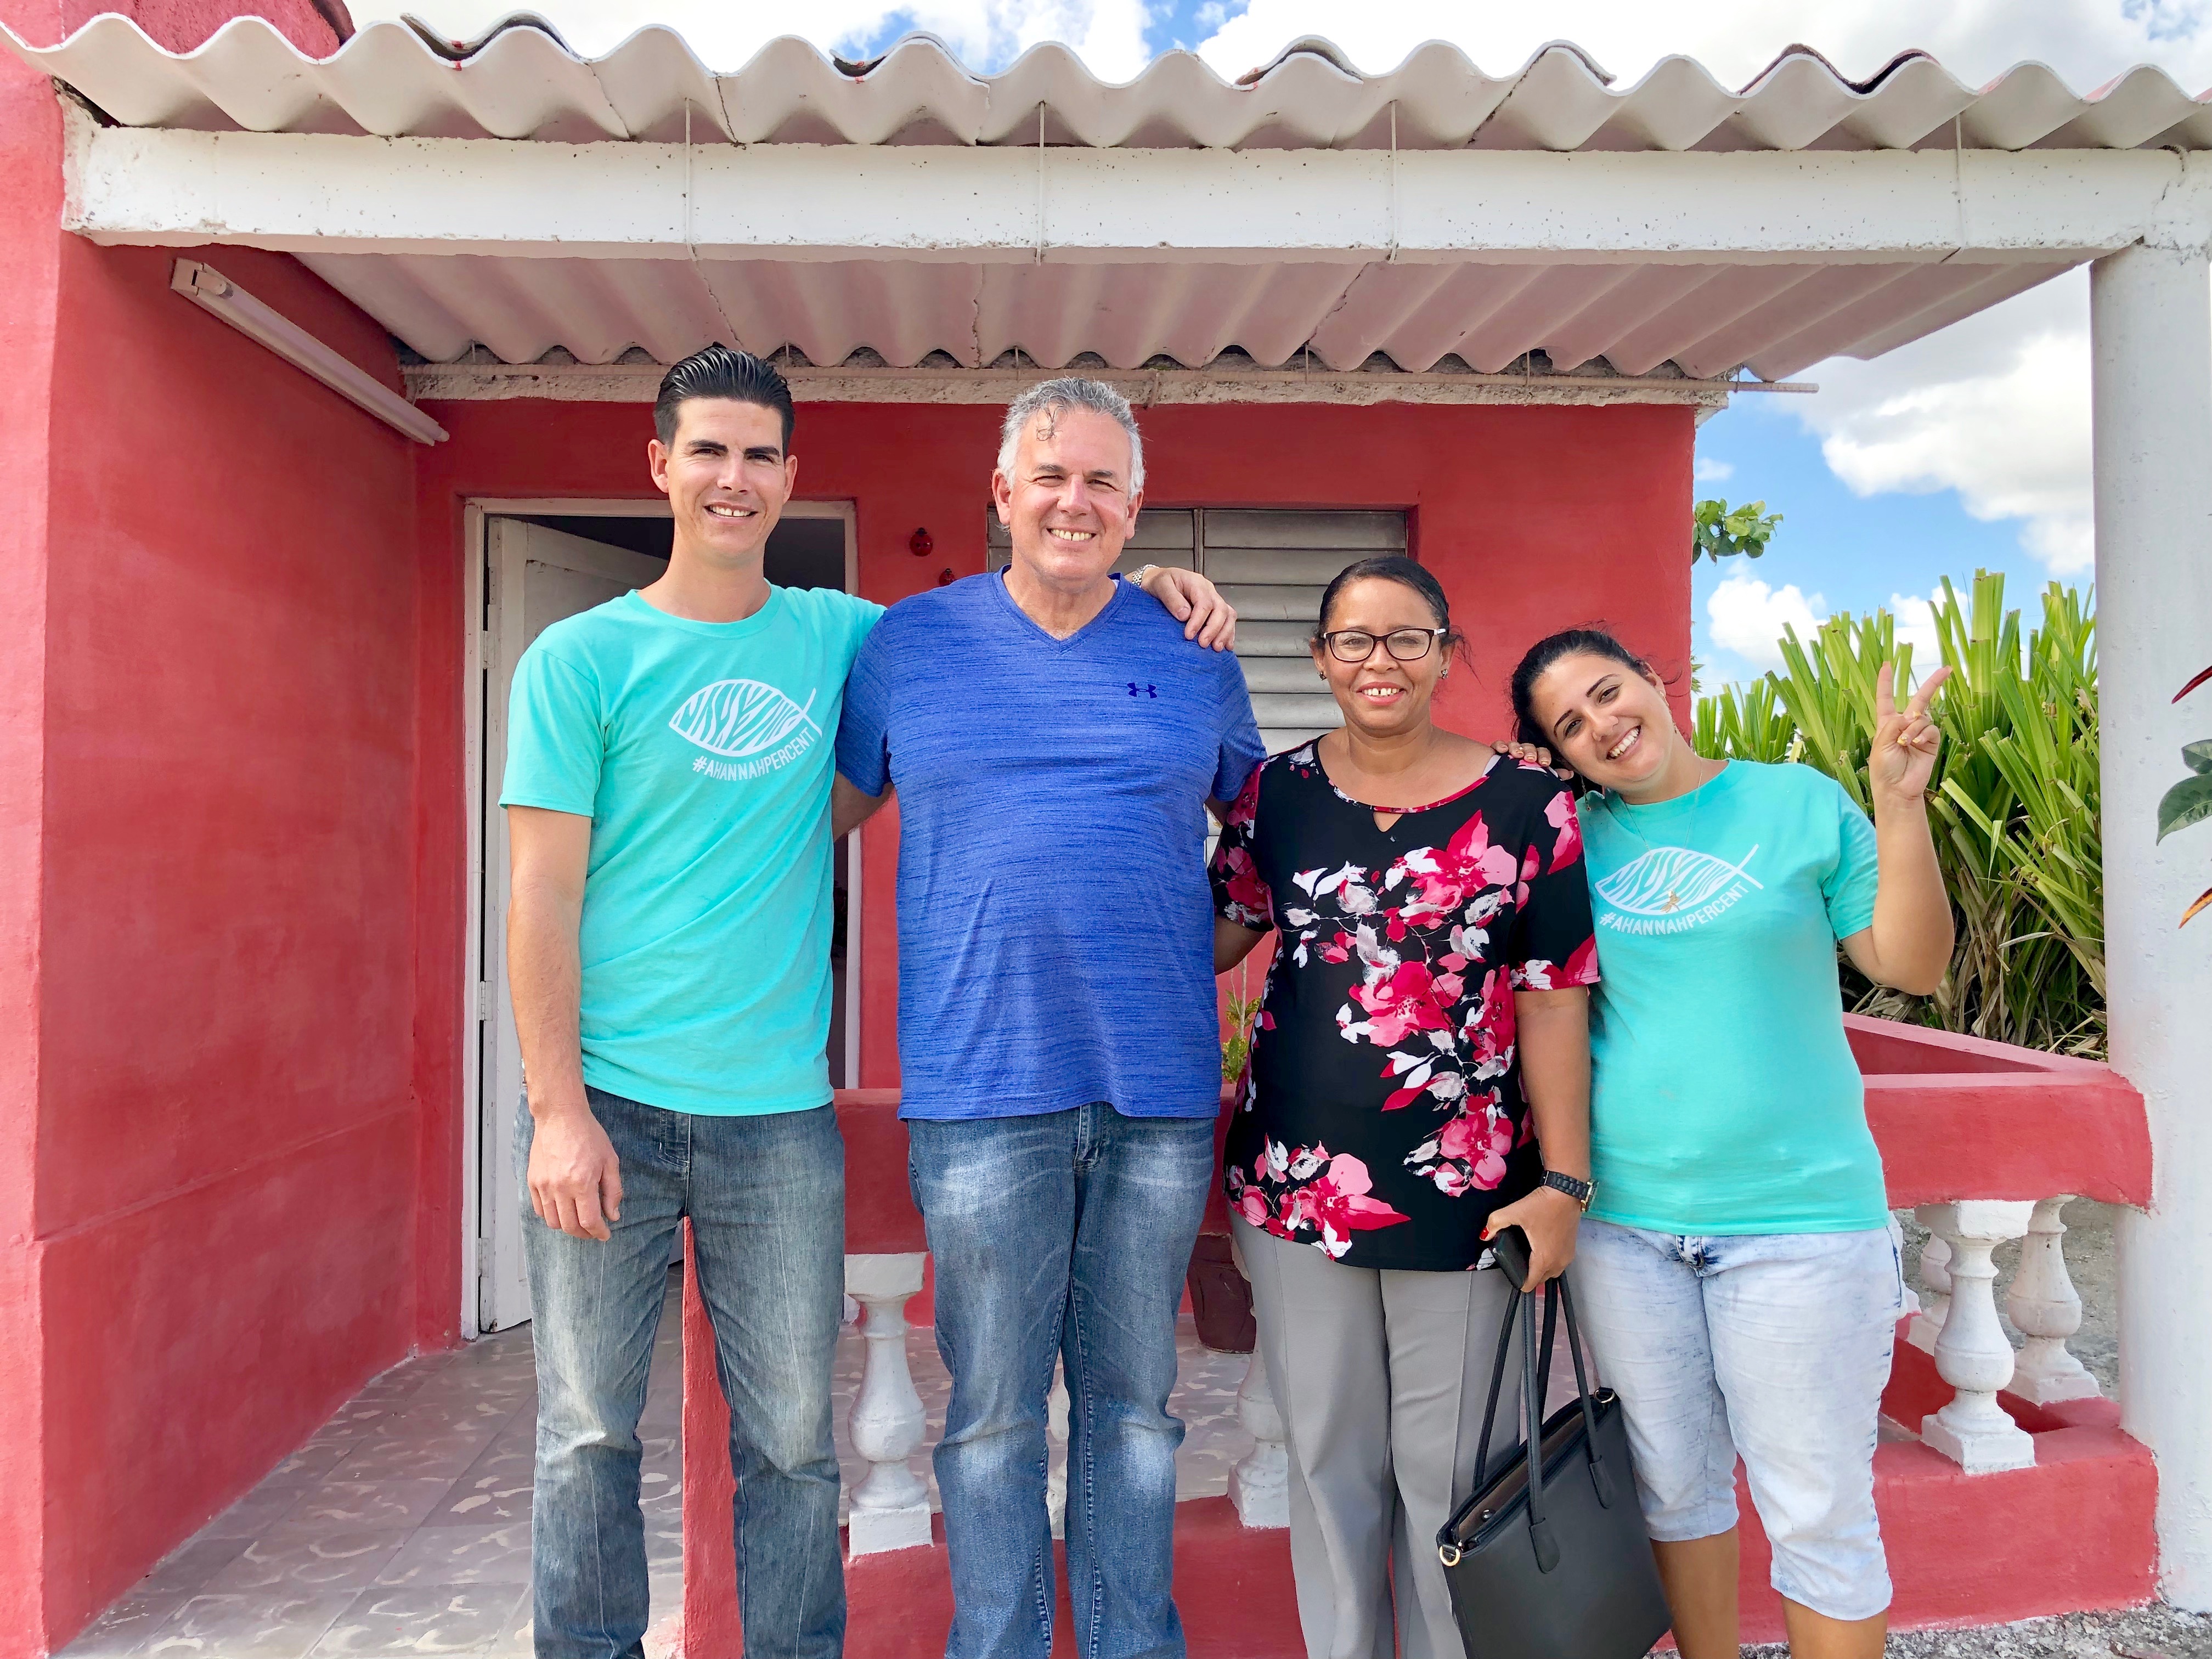 Dave with Mario & Yani and Sara who is married to Pastor Justo. Justo and Sara are also great friends who train others to plant churches in Cuba!